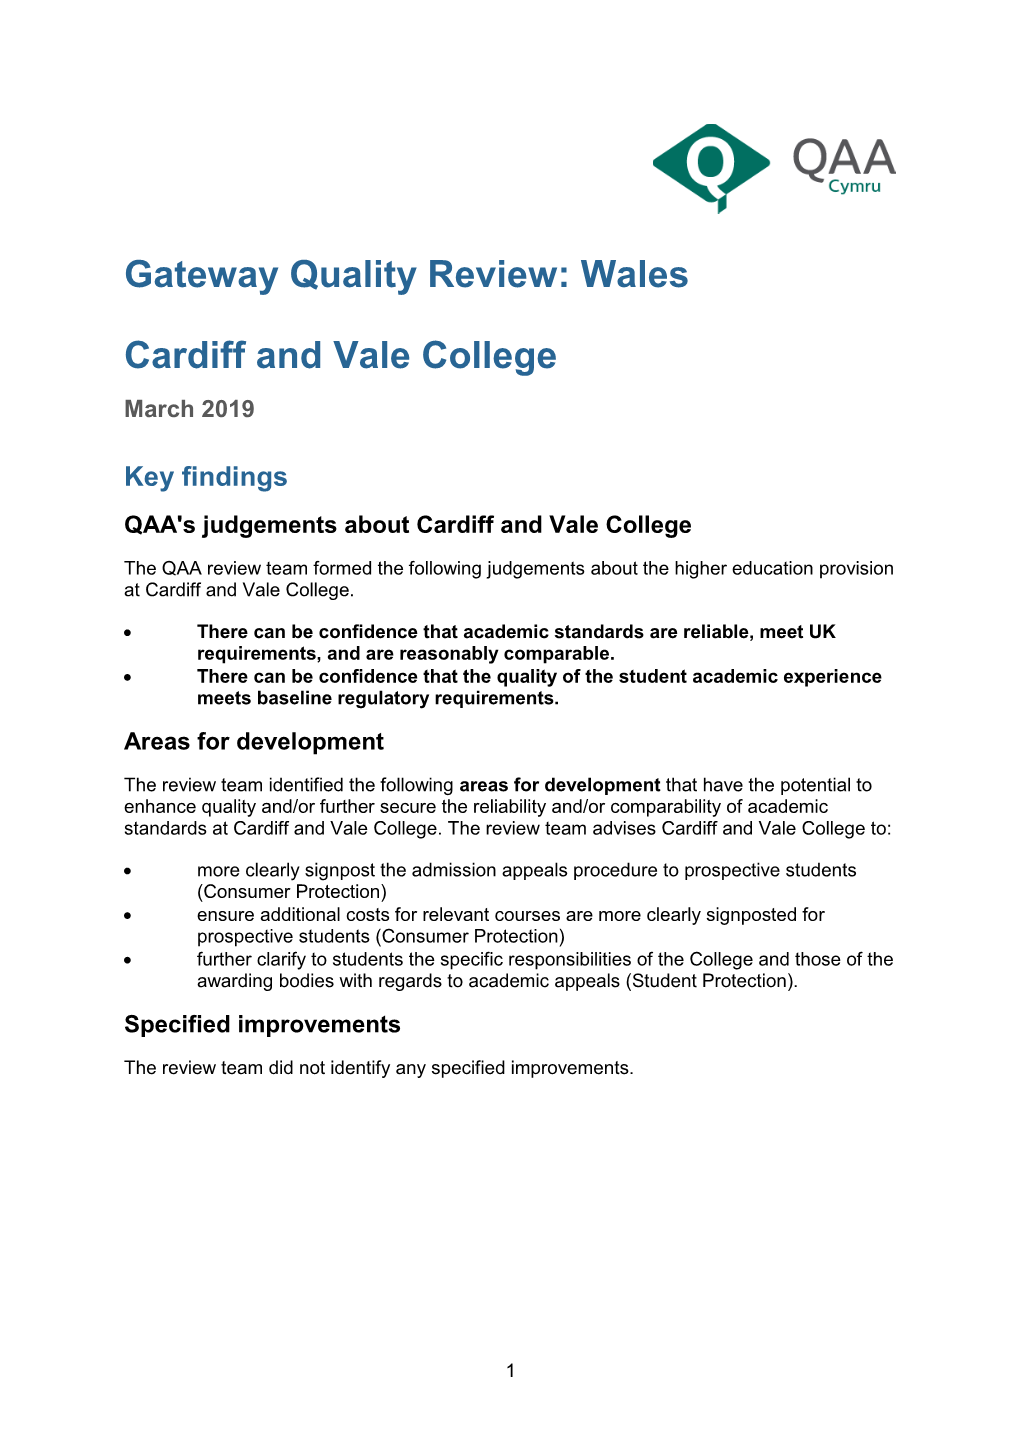 Cardiff and Vale College, March 2019